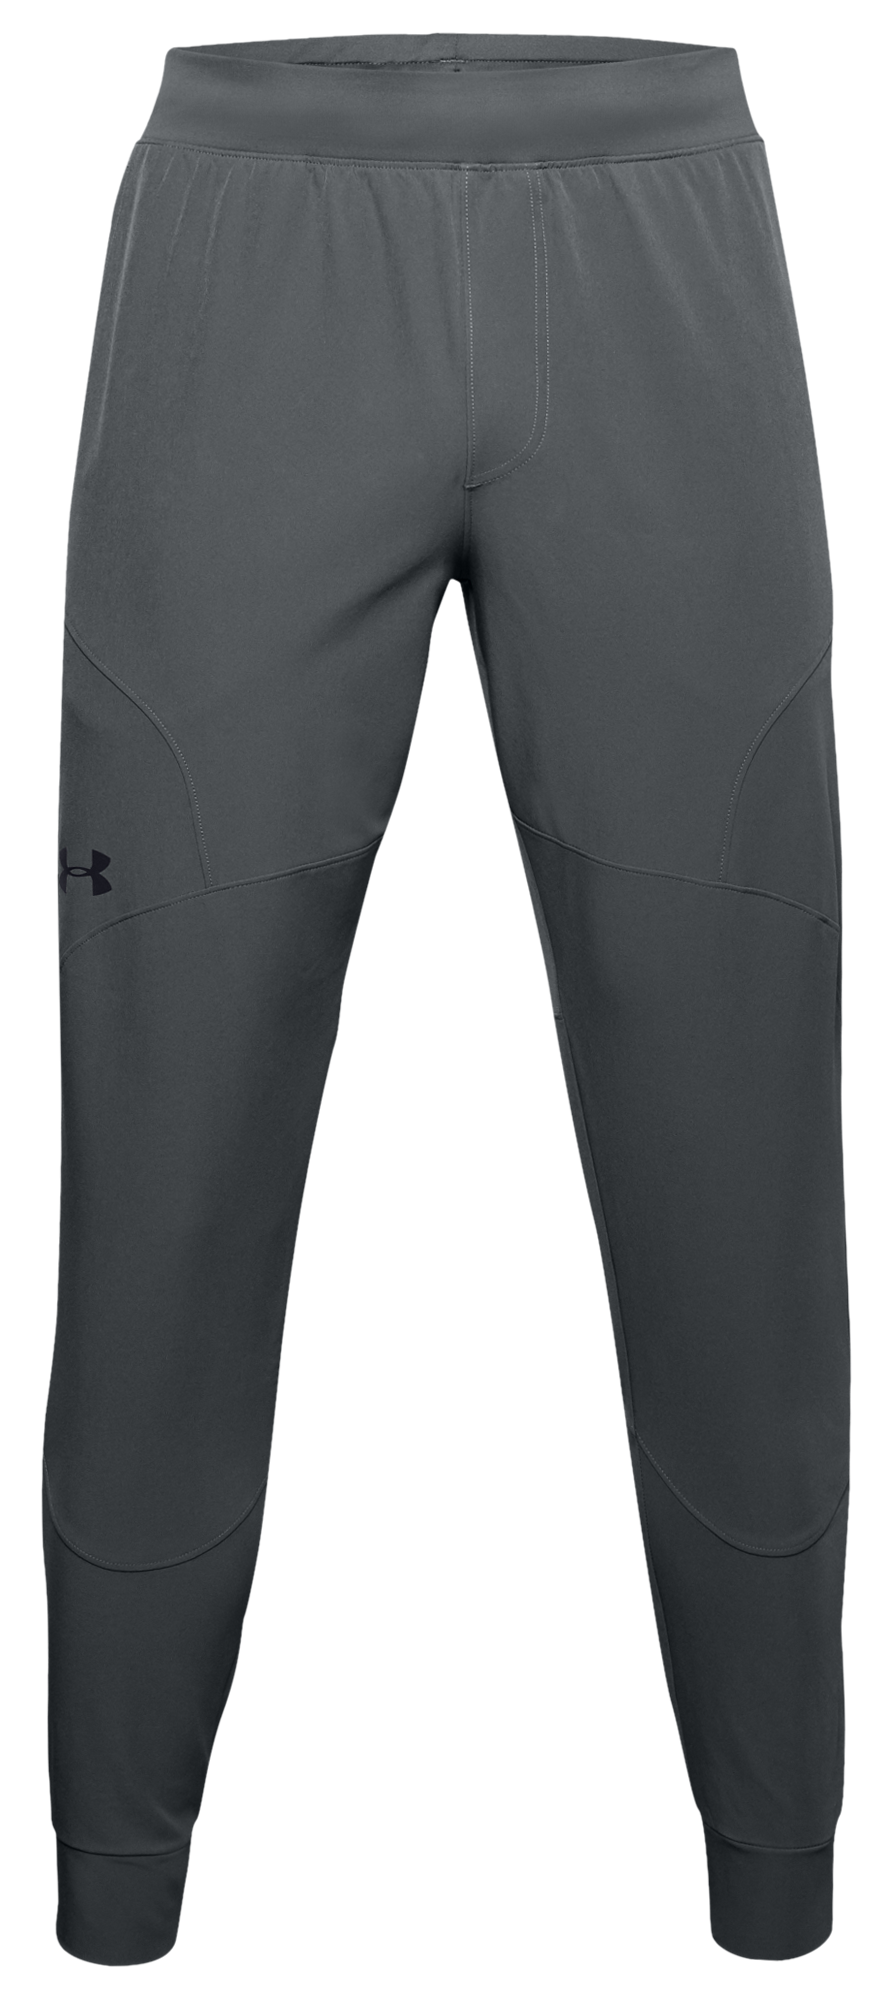 Under Armour Unstoppable Cargo Shorts - Men's